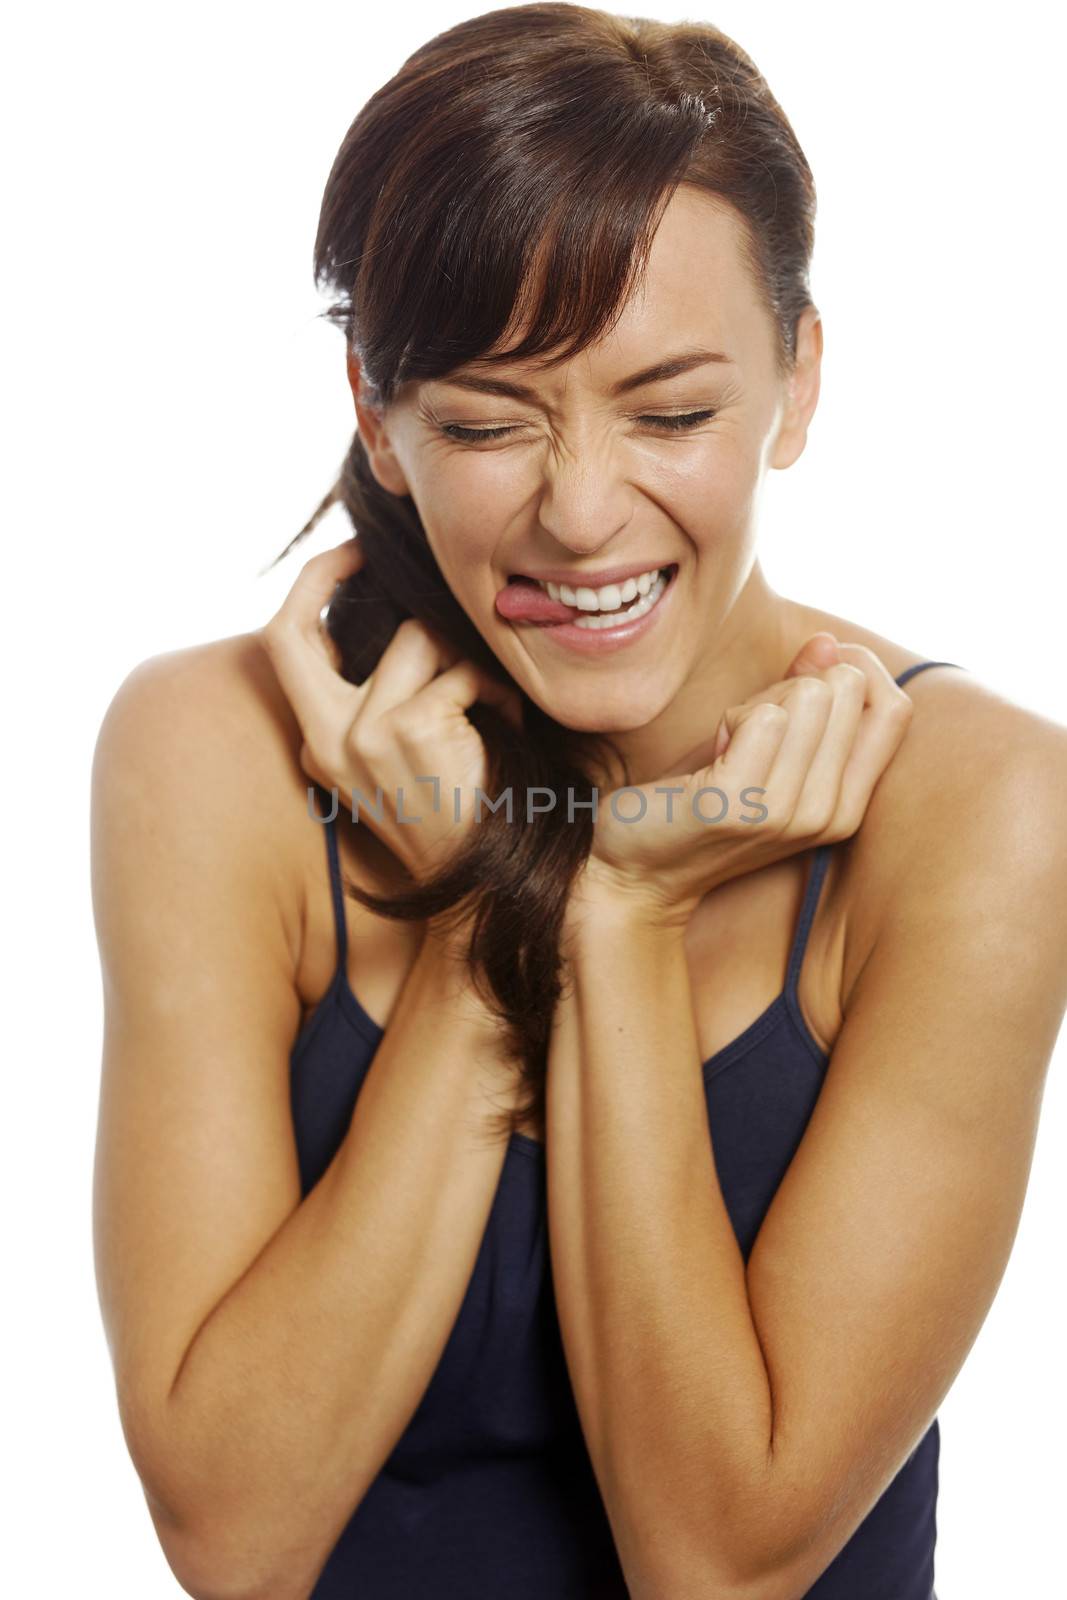 Young woman expressing excitement.